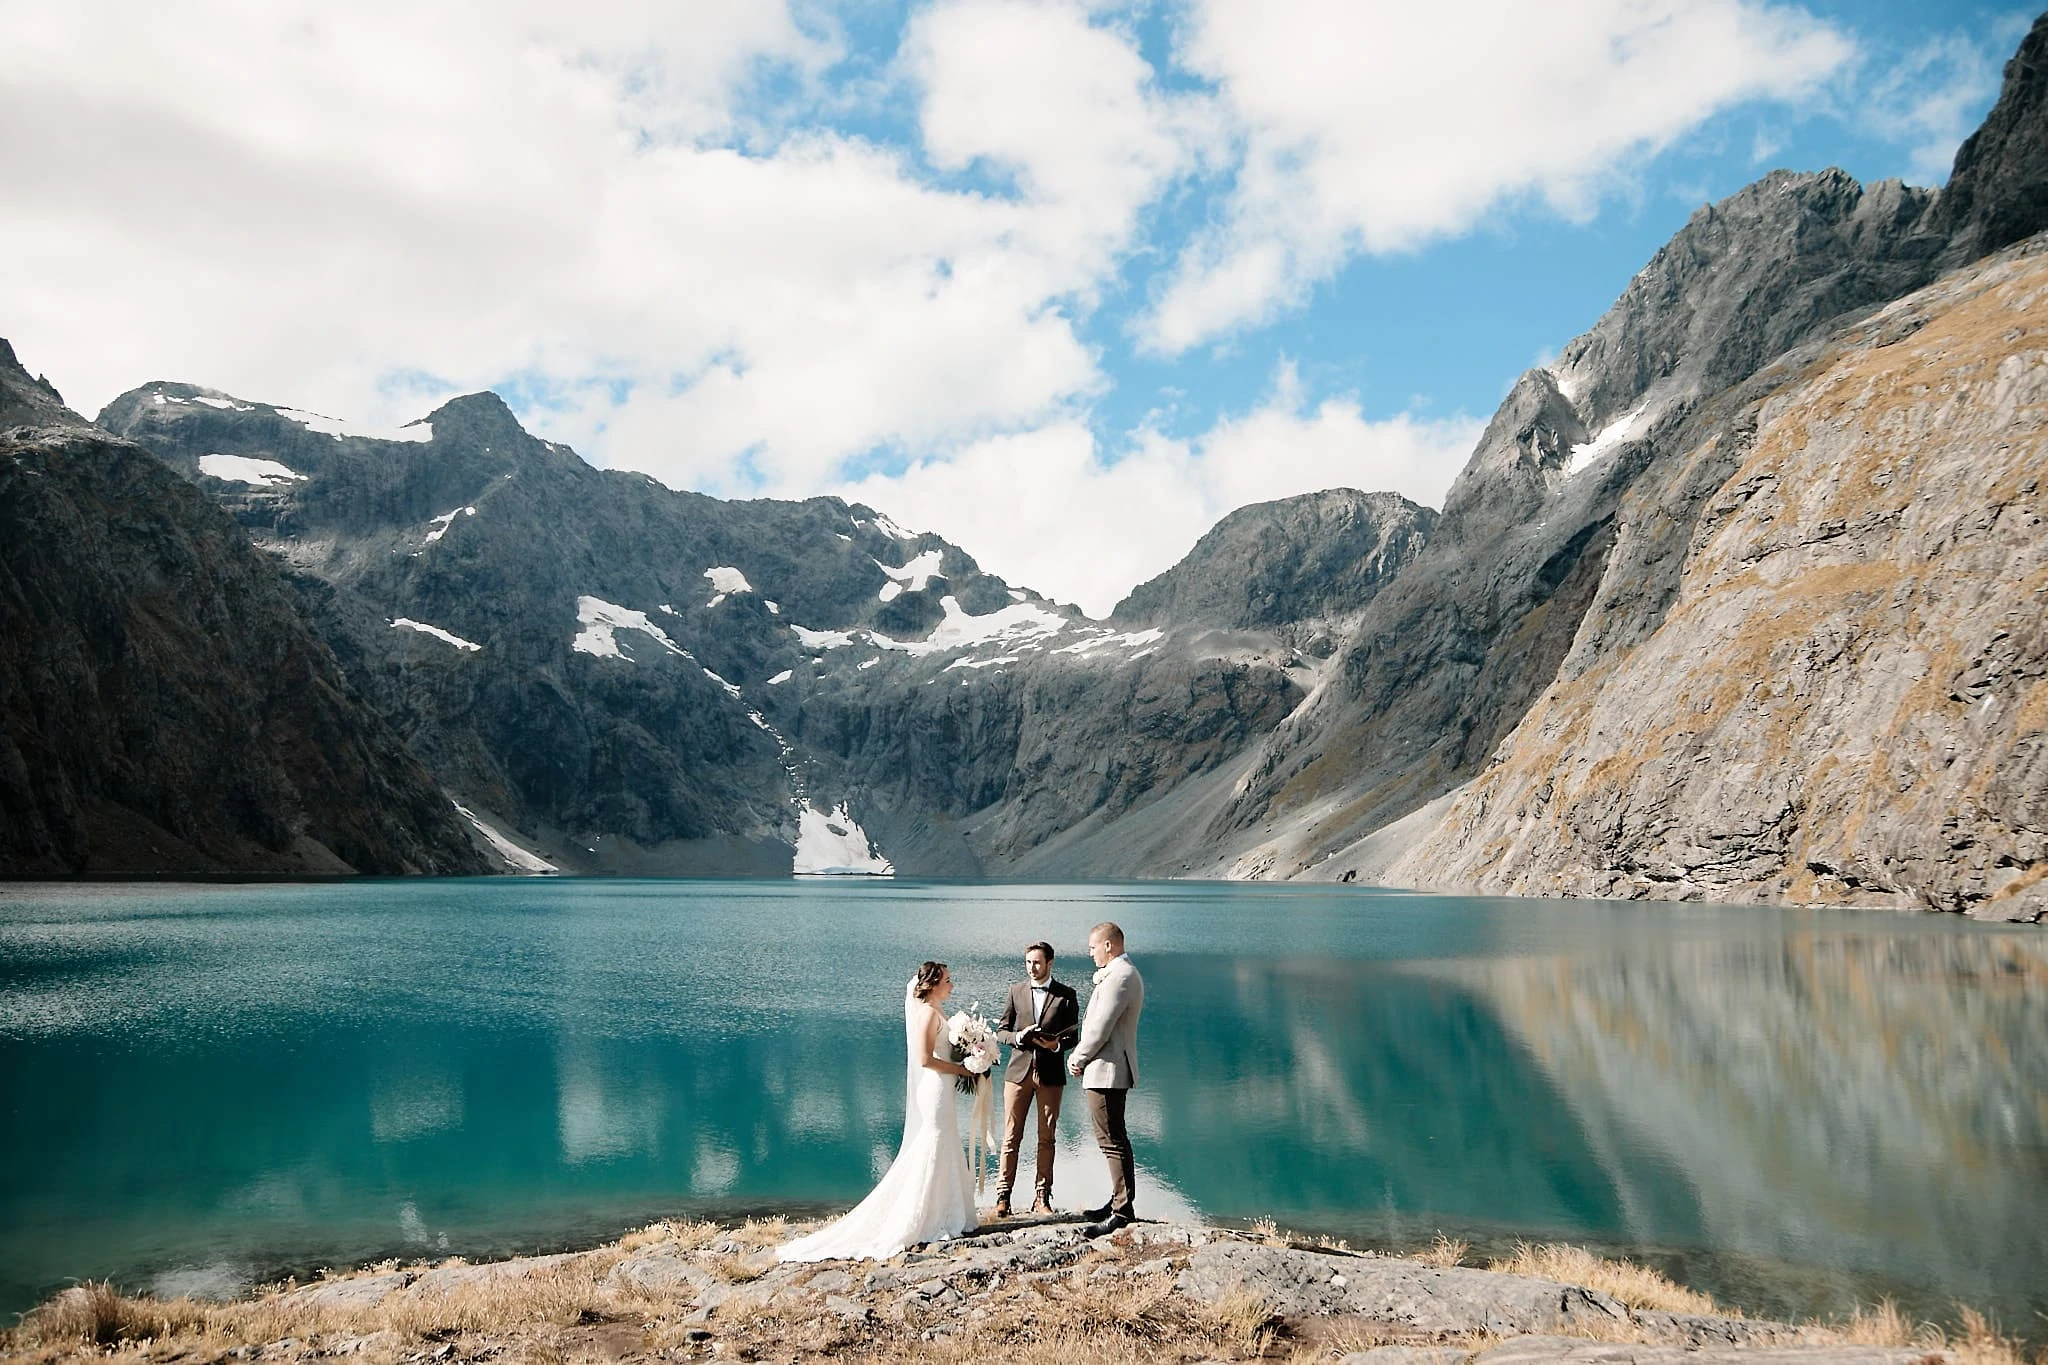 A bride and groom eloping in Queenstown, New Zealand captured by a wedding photographer.